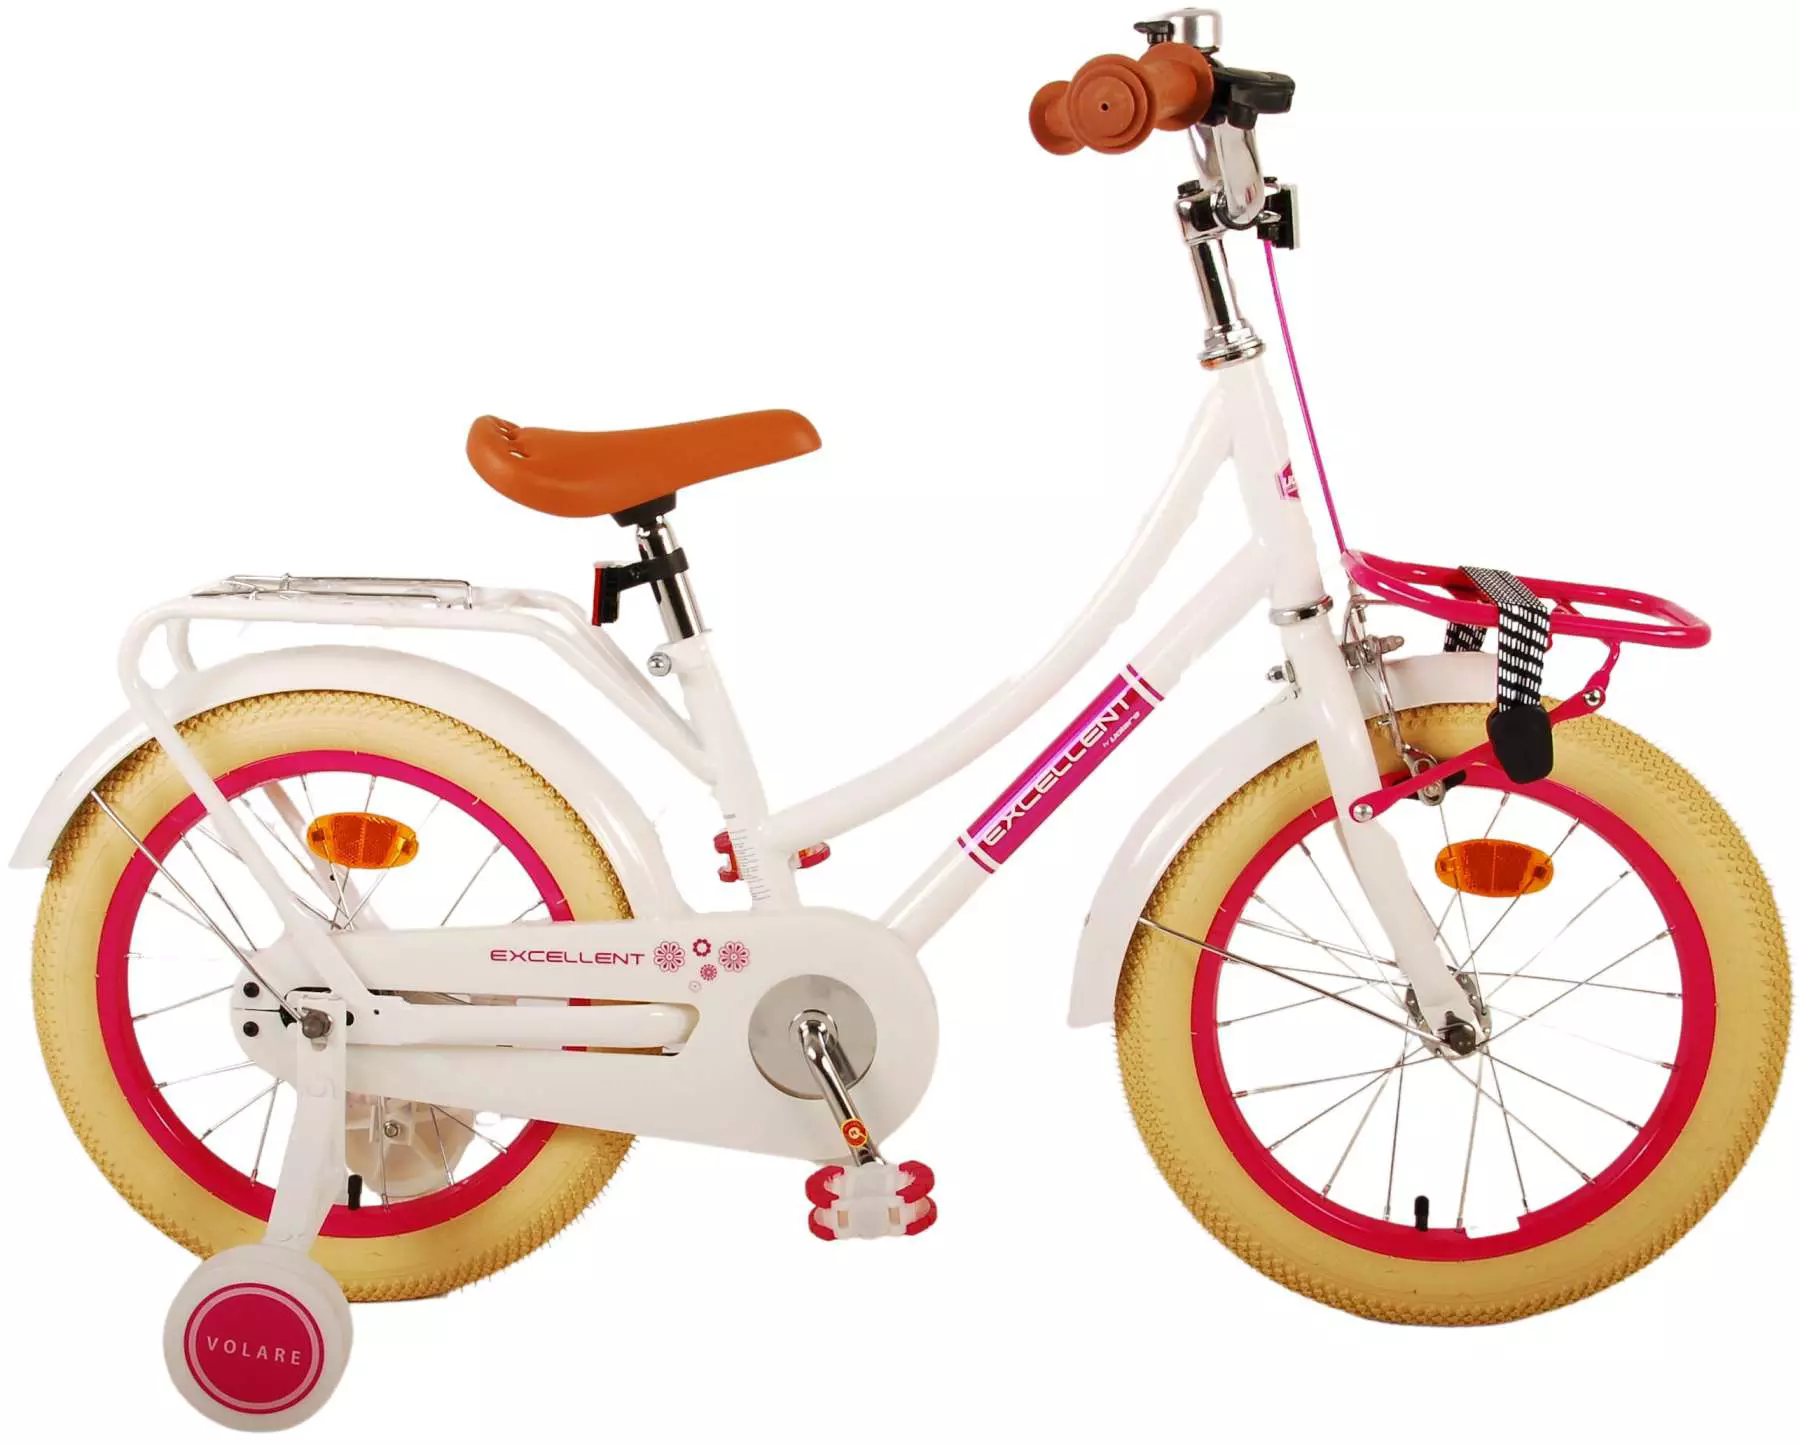 Volare Childrens Bicycle " Excellent White